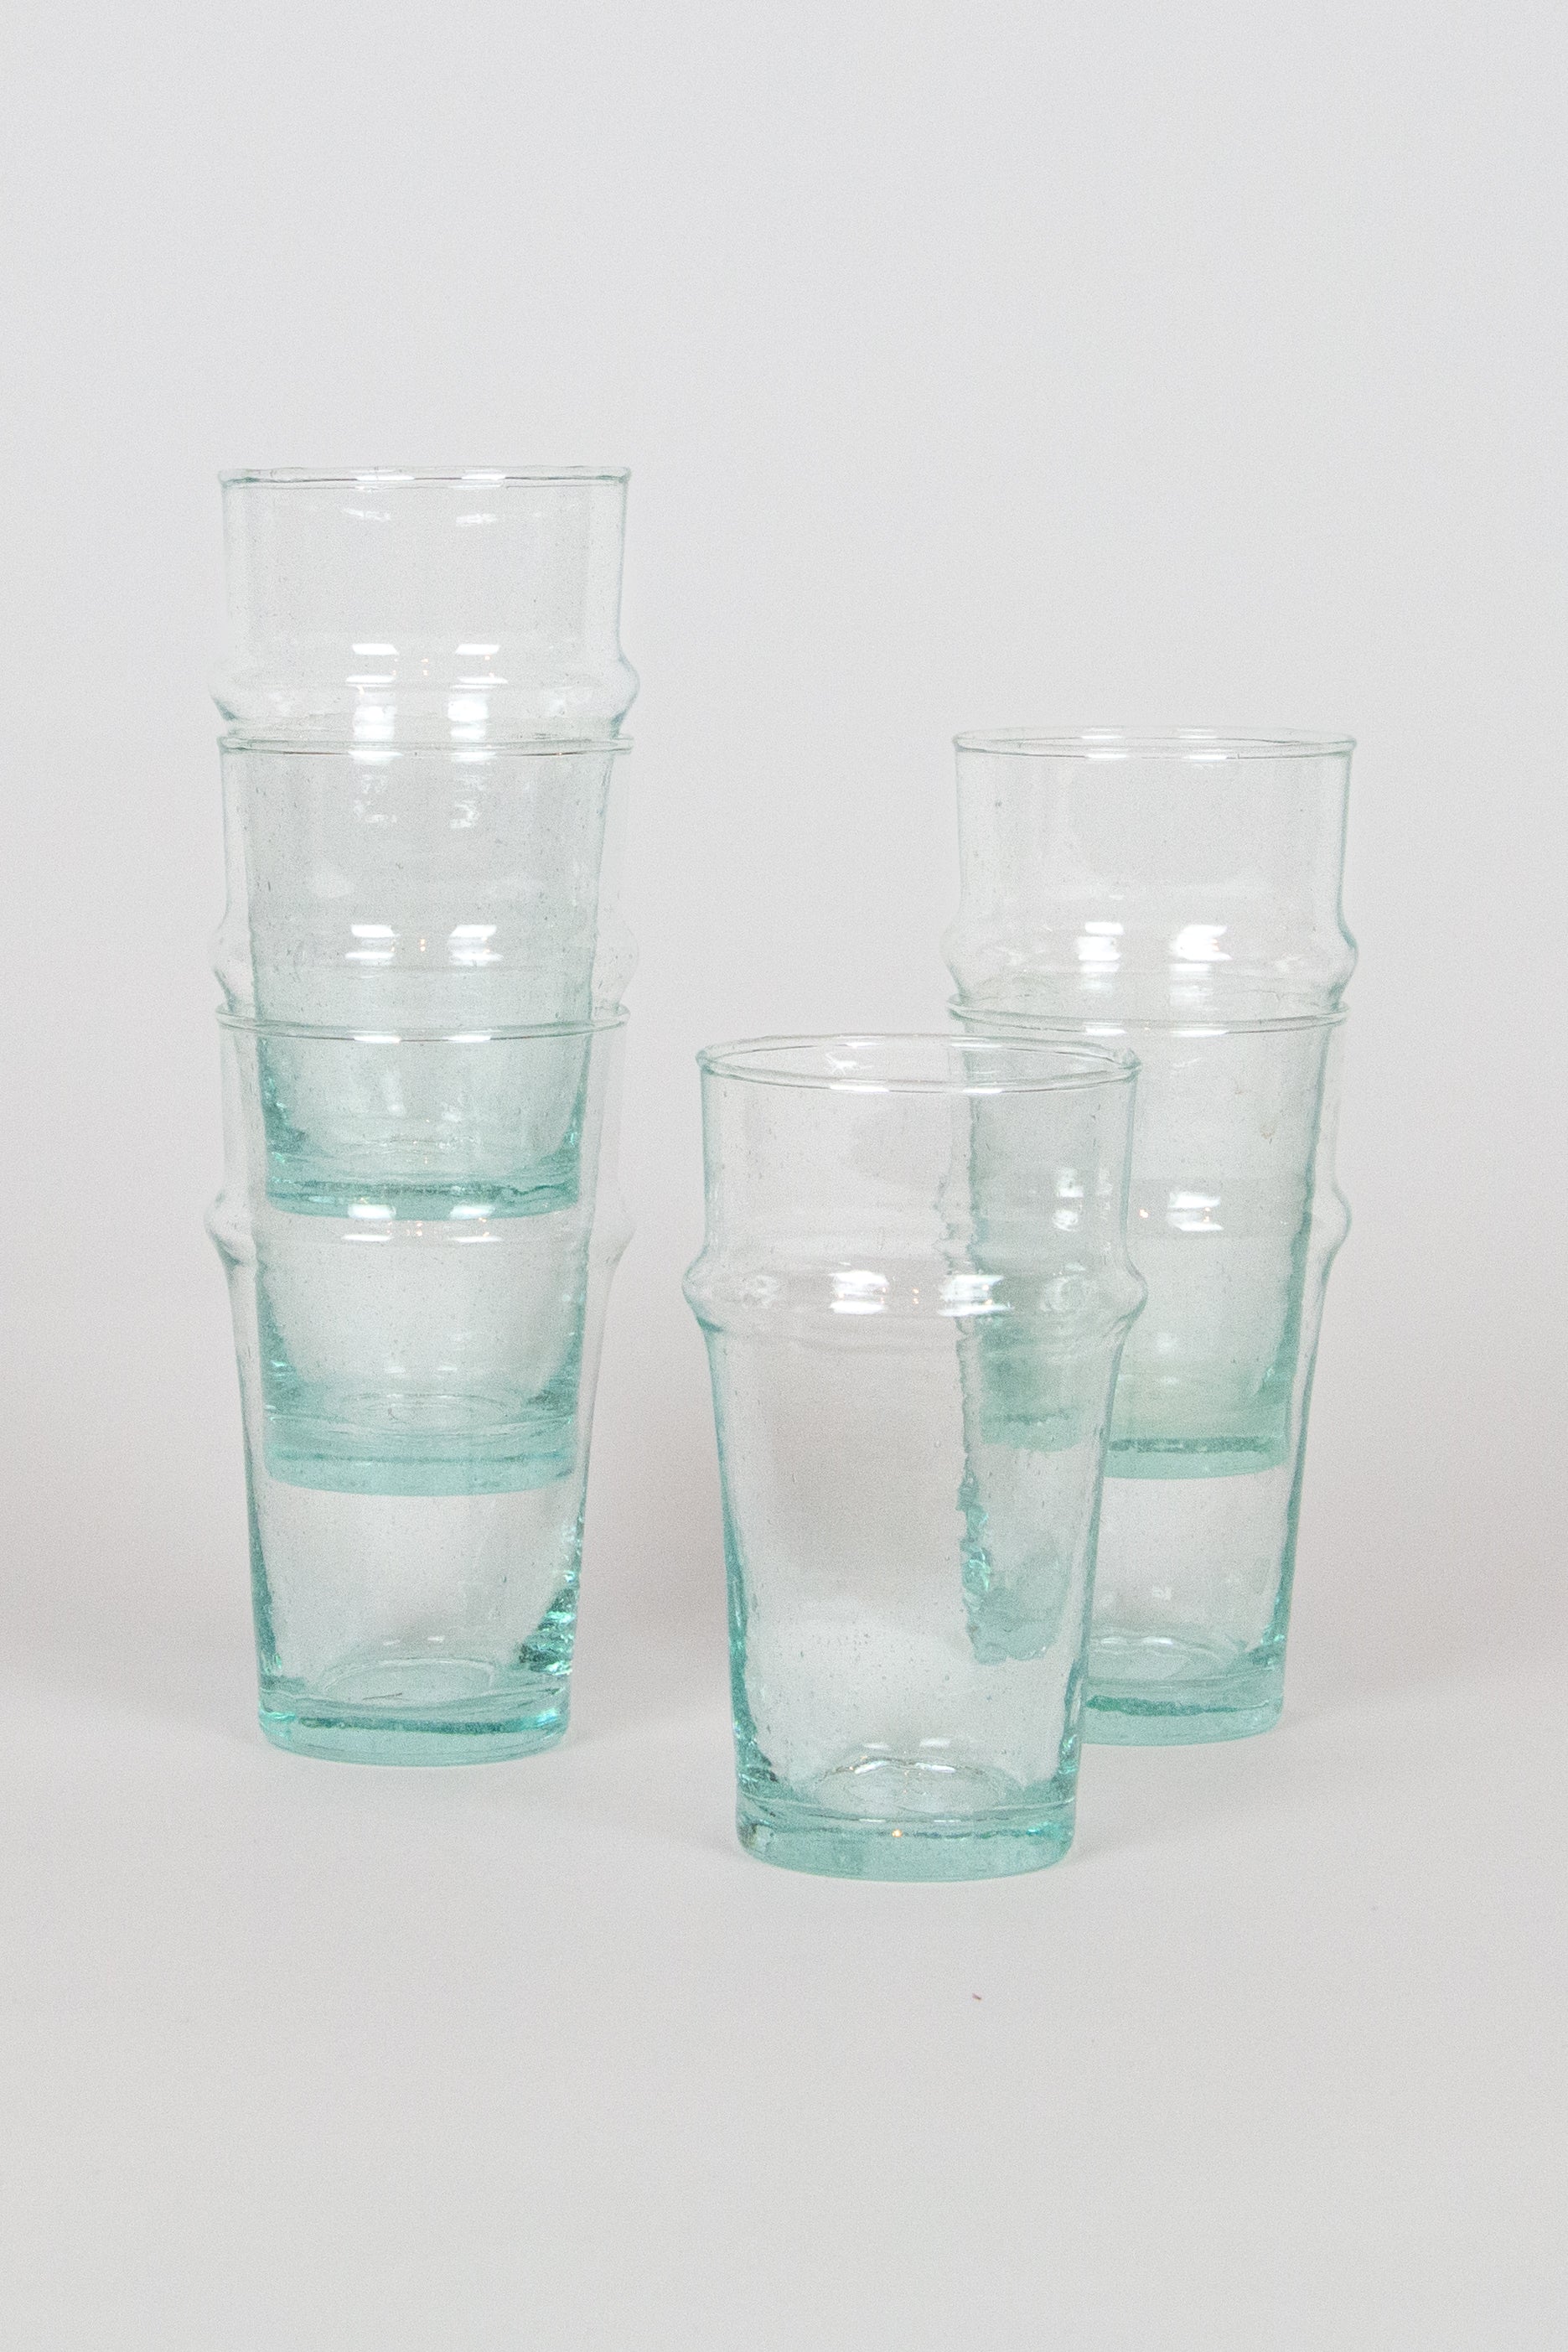 Moroccan Beldi Tall Glasses in Clear, SET OF 6